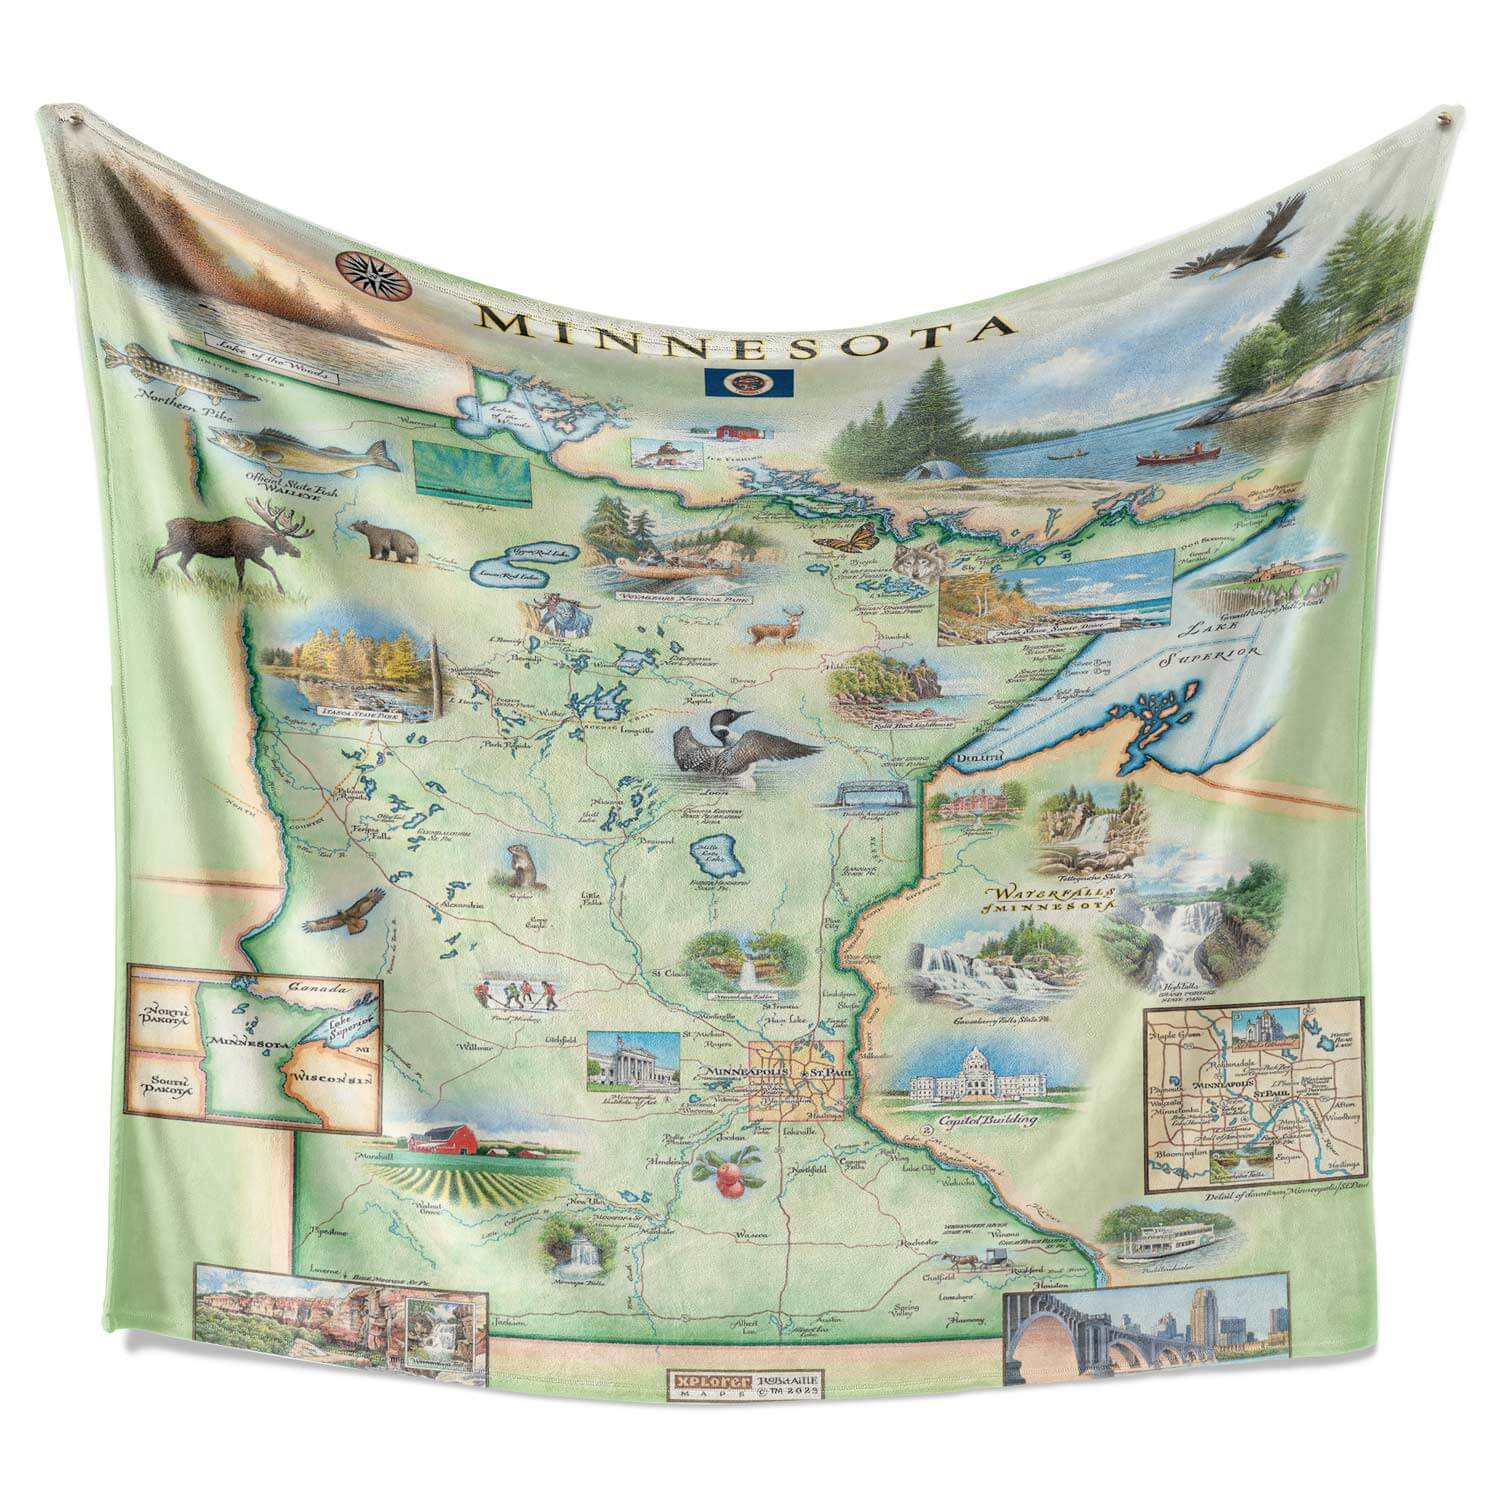 Wrap yourself in warmth and Minnesota State pride with this cozy fleece blanket. Featuring a detailed map adorned with illustrations of canoes, wolves, elk, bears, birds, and fish, alongside iconic landmarks like Minneapolis, Prince, St. Paul, and other popular attractions, it's the perfect way to stay cozy while celebrating the Land of 10,000 Lakes.